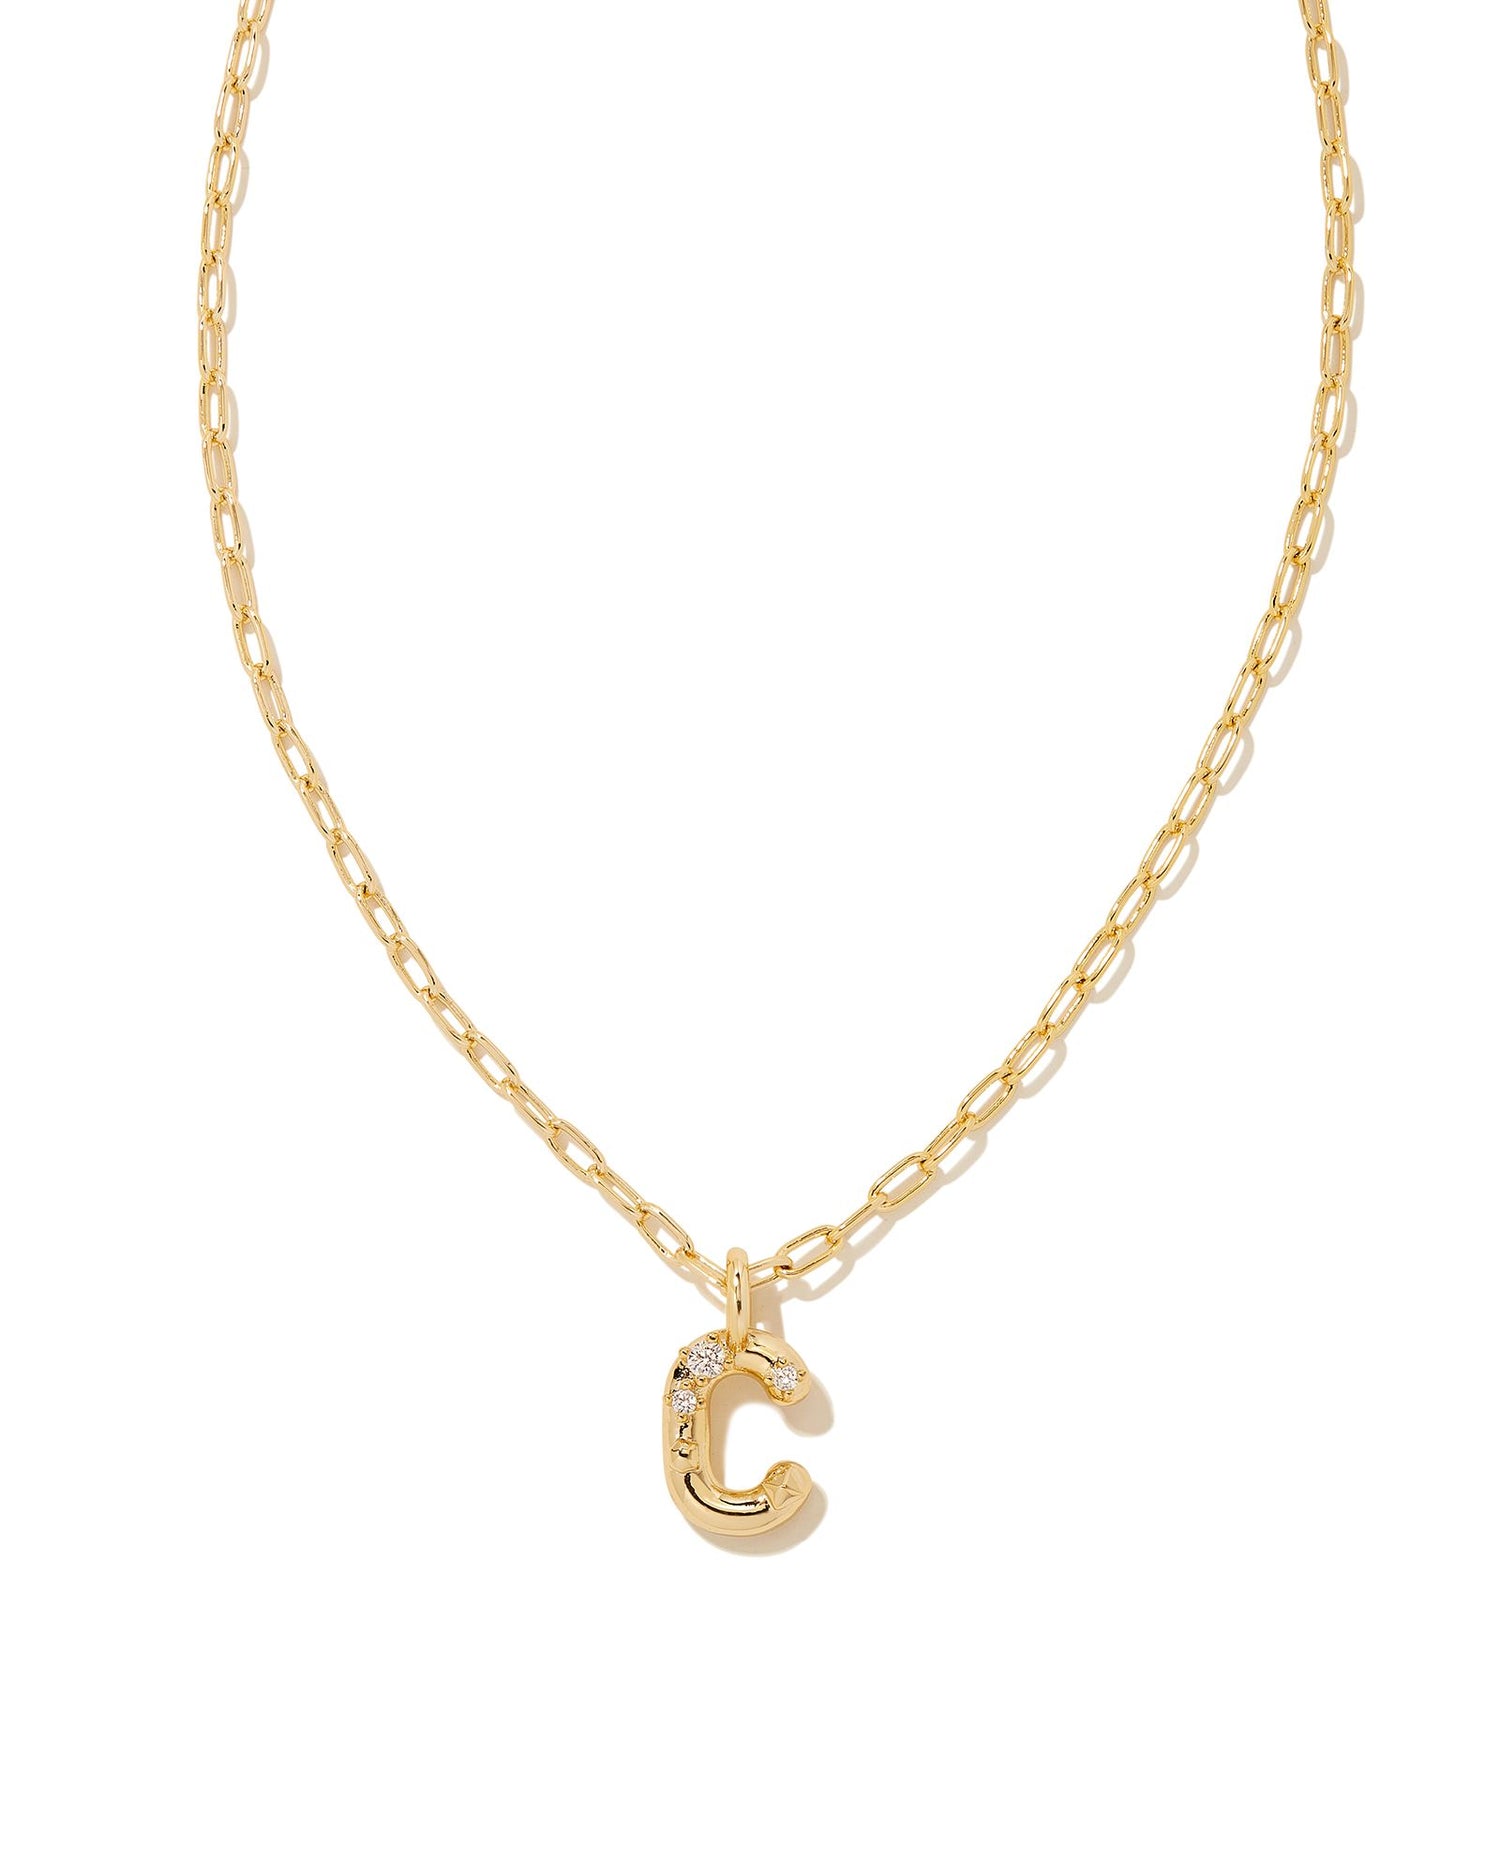 Personalize your everyday look with the Crystal Letter Short Pendant Necklace in White Crystal. Whether you’re rocking your initial or a loved one’s, this sentimental layer is one you’ll keep coming back to again and again.  Dimensions- 16' CHAIN WITH 3' EXTENDER, 0.62'L X 0.35"W PENDANT Metal- 14K Gold plated over brass Closure- Lobster Clasp Material-   White CZ Letter C